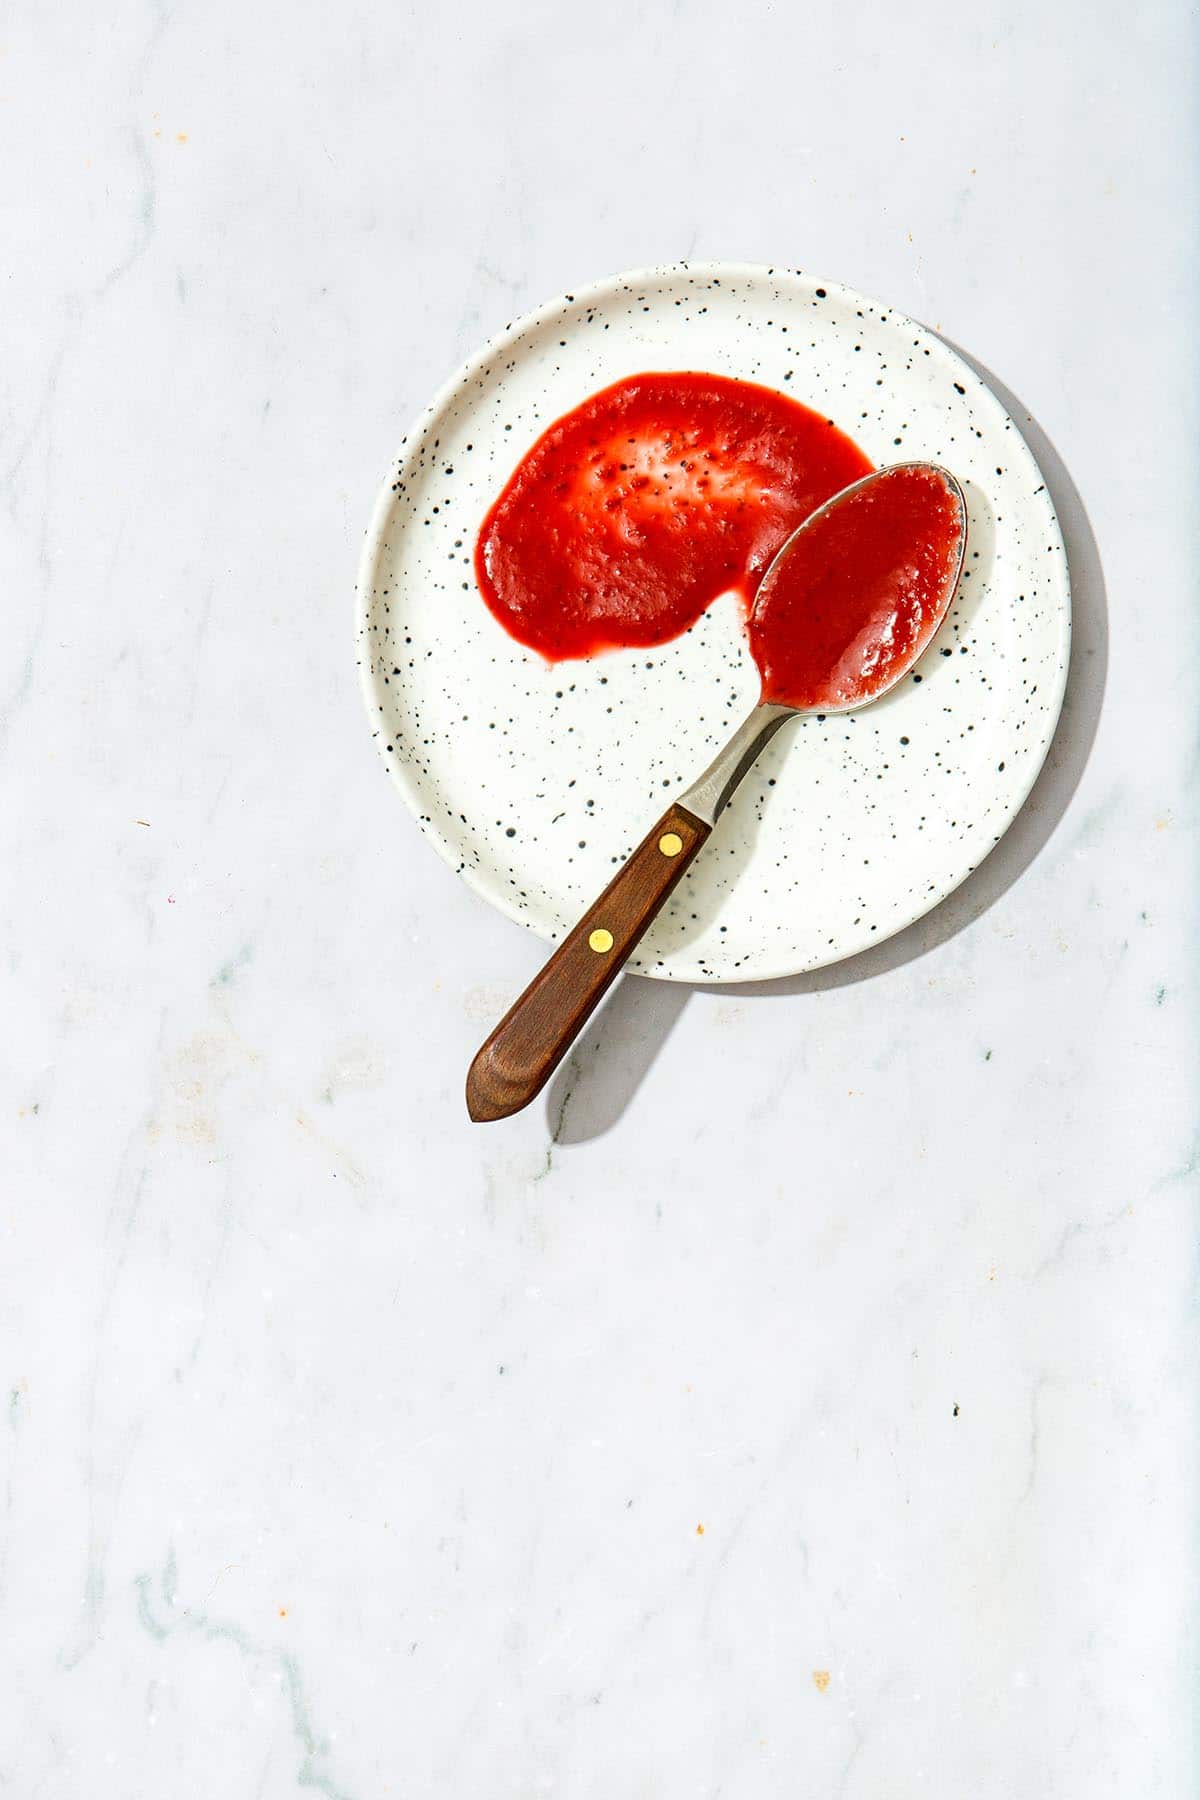 A spoonful of vegan BBQ sauce smeared artfully on a small white speckled plate on a marble background.